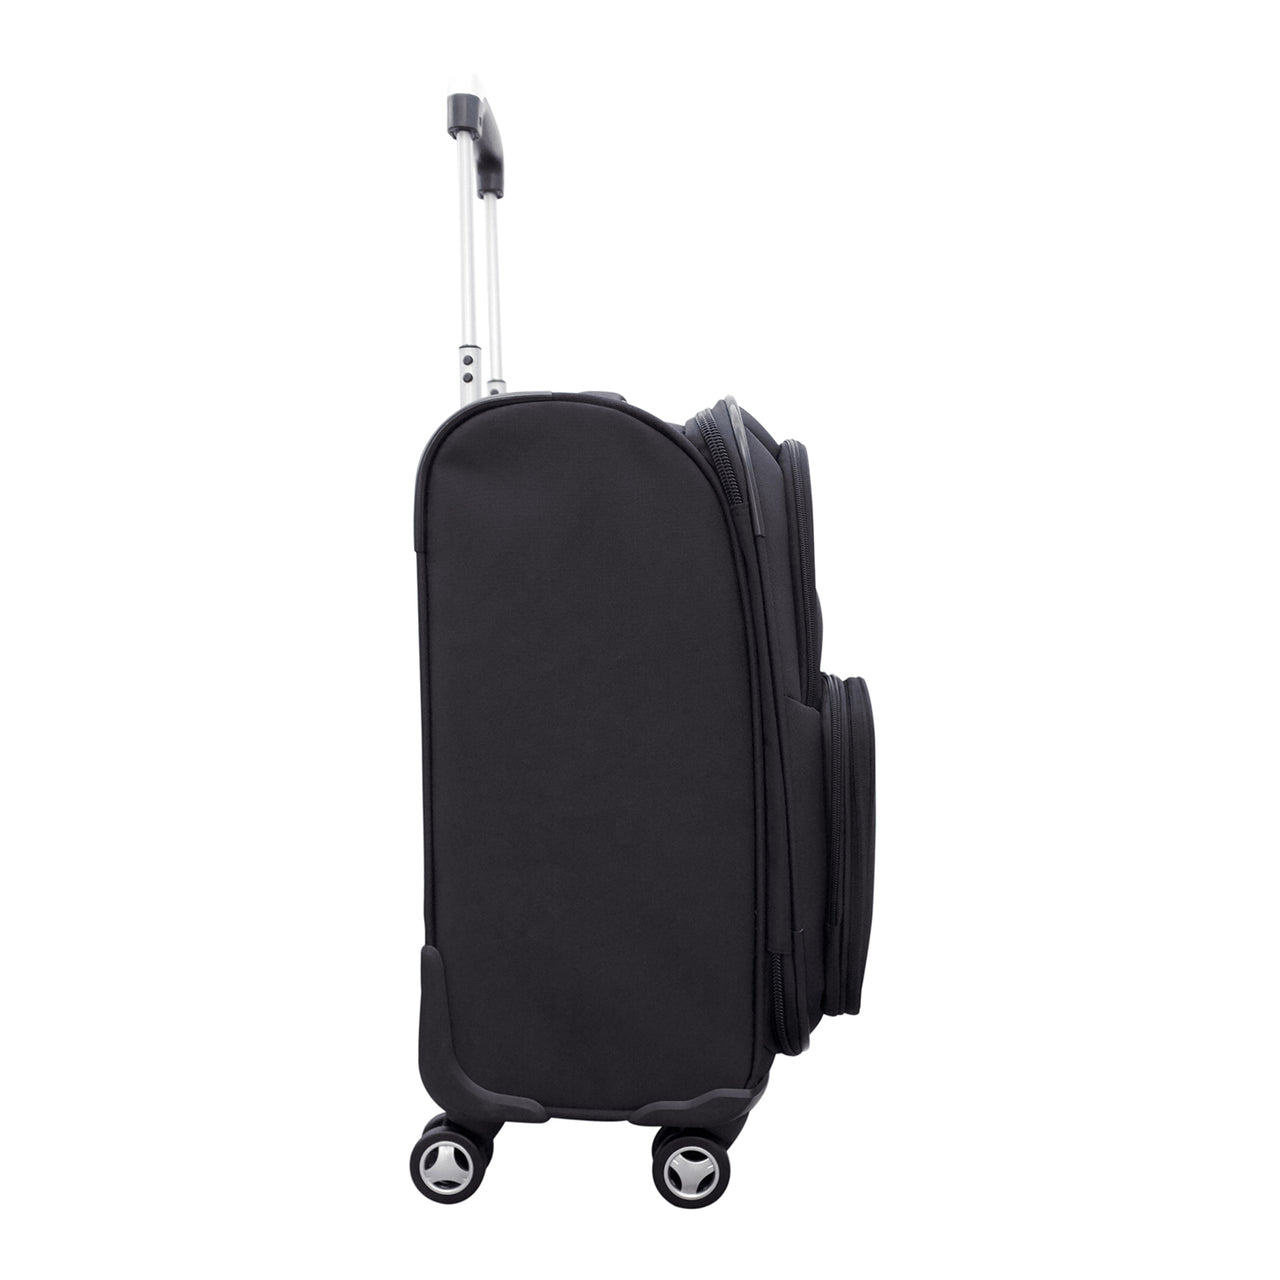 Golden State Warriors 20" Carry-on Spinner Luggage